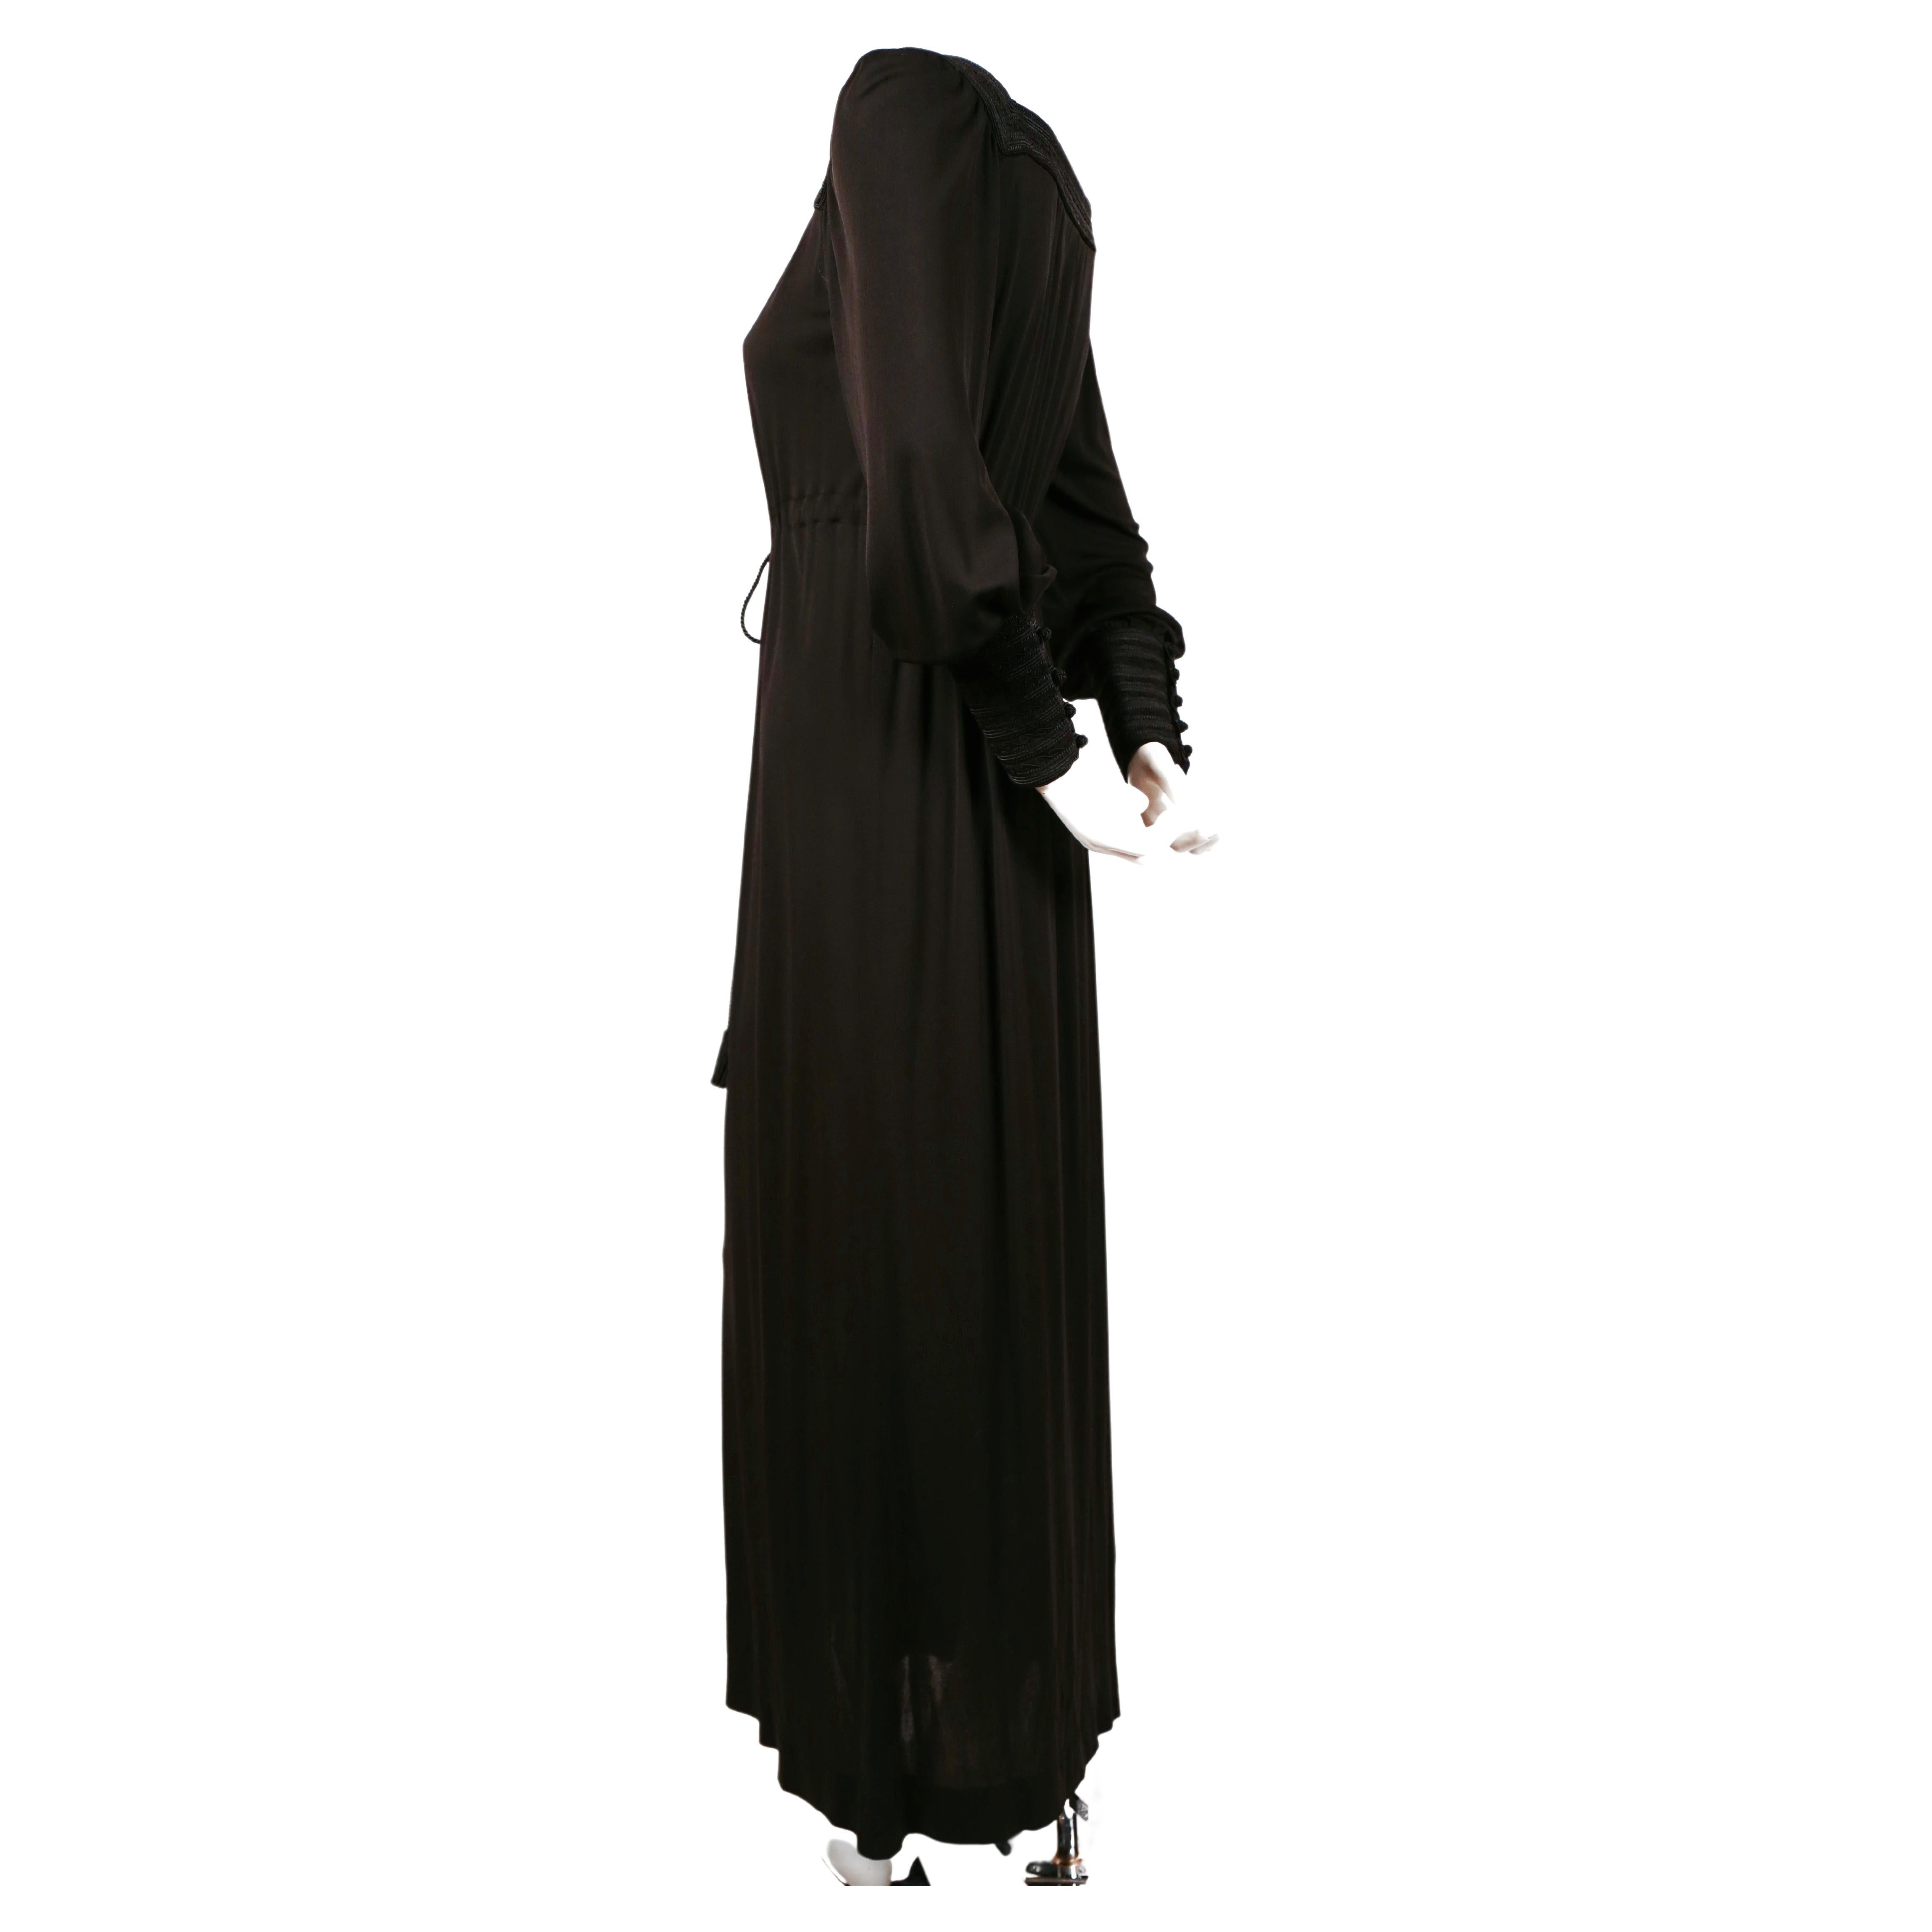 1974 YVES SAINT LAURENT black jersey gown with soutache trim In Good Condition For Sale In San Fransisco, CA